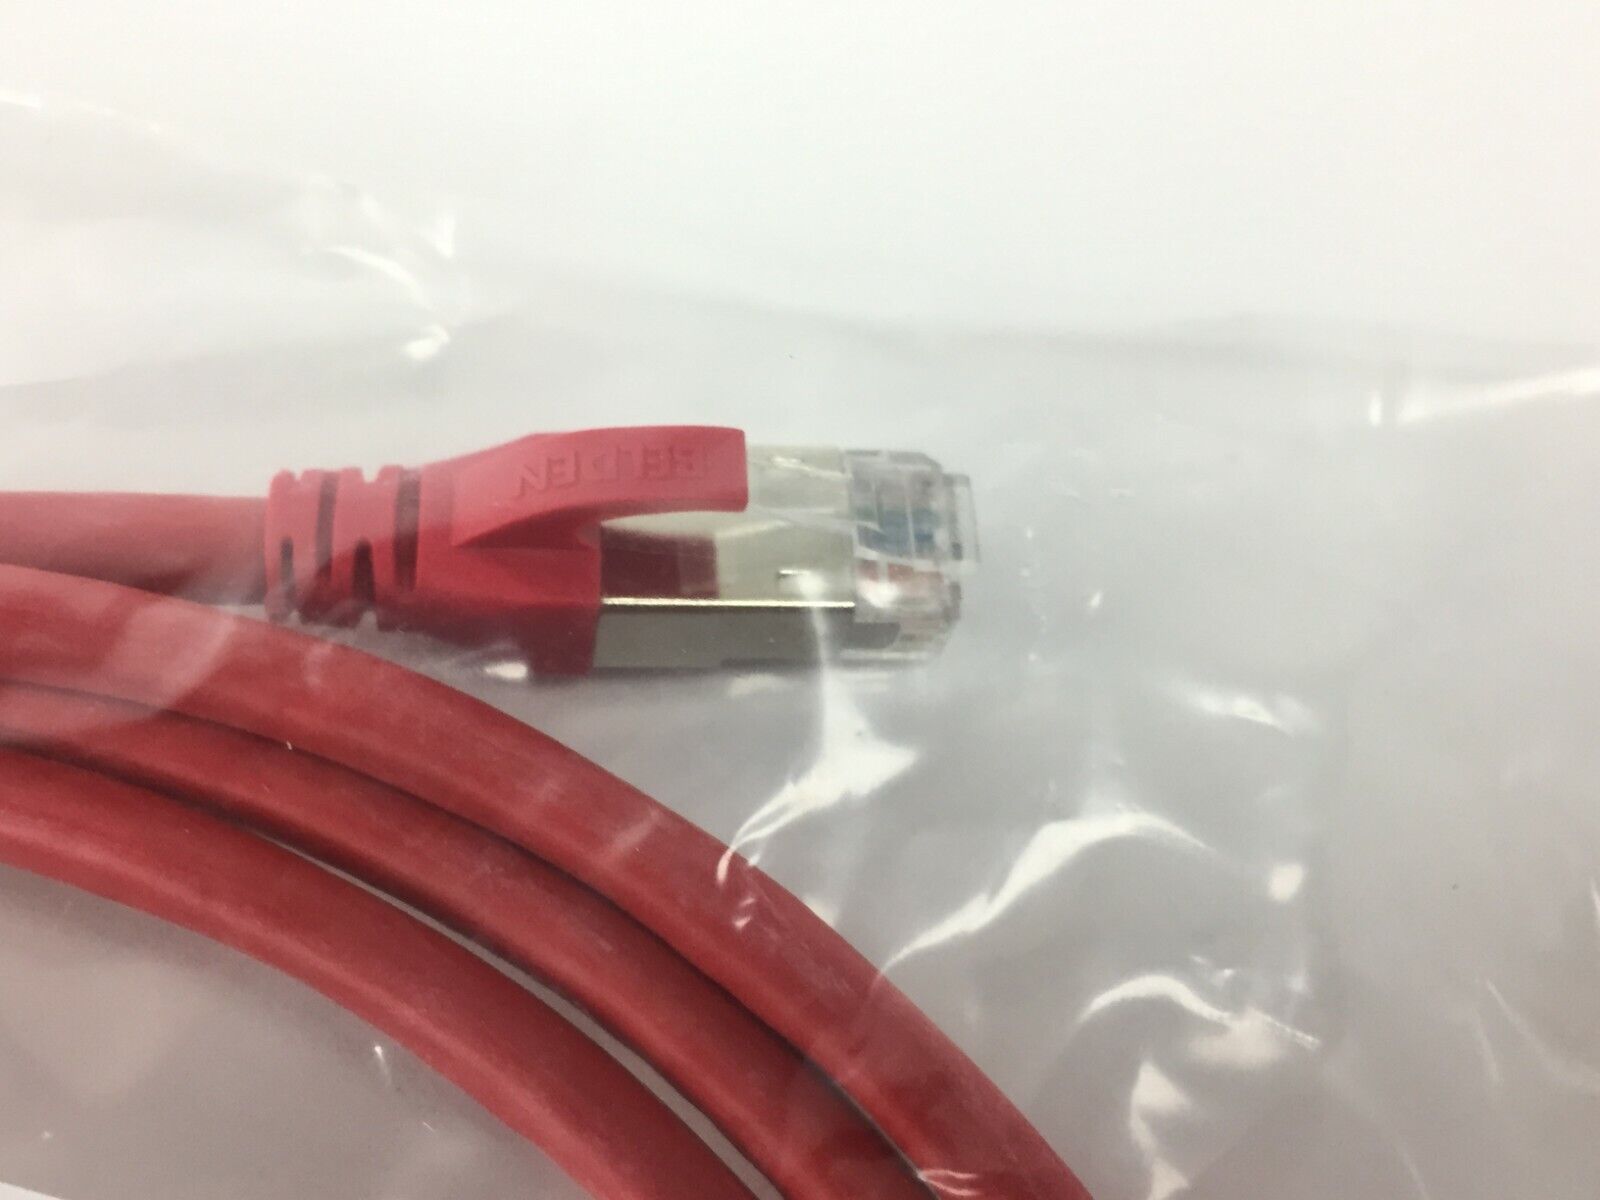 Belden C6F1102007 CAT6 Ethernet Patch Networking Cable 201739 Cord, RED, 7-Foot